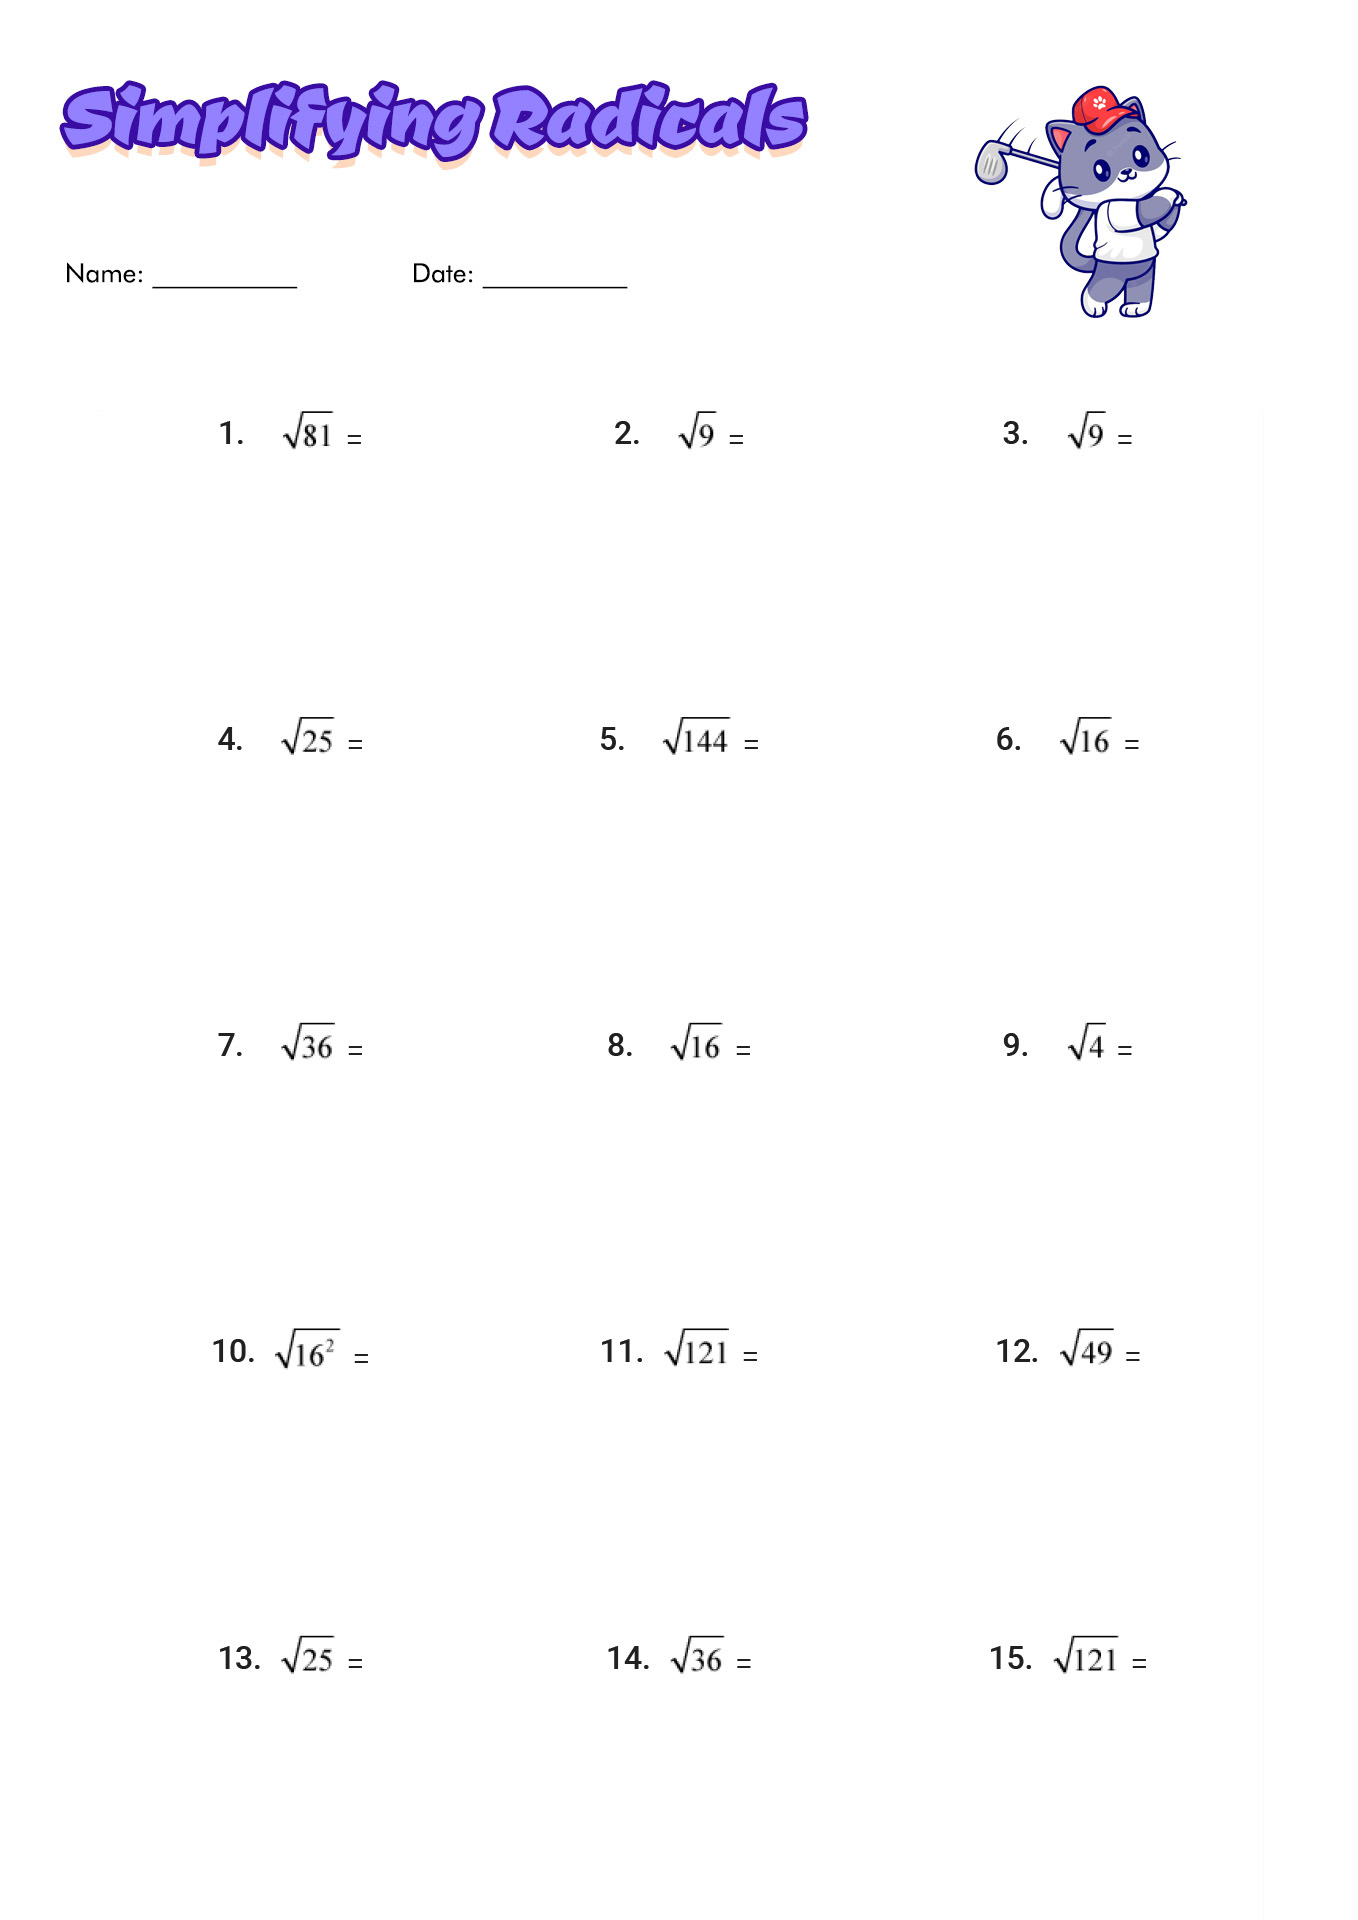 simplifying-expressions-practice-worksheet